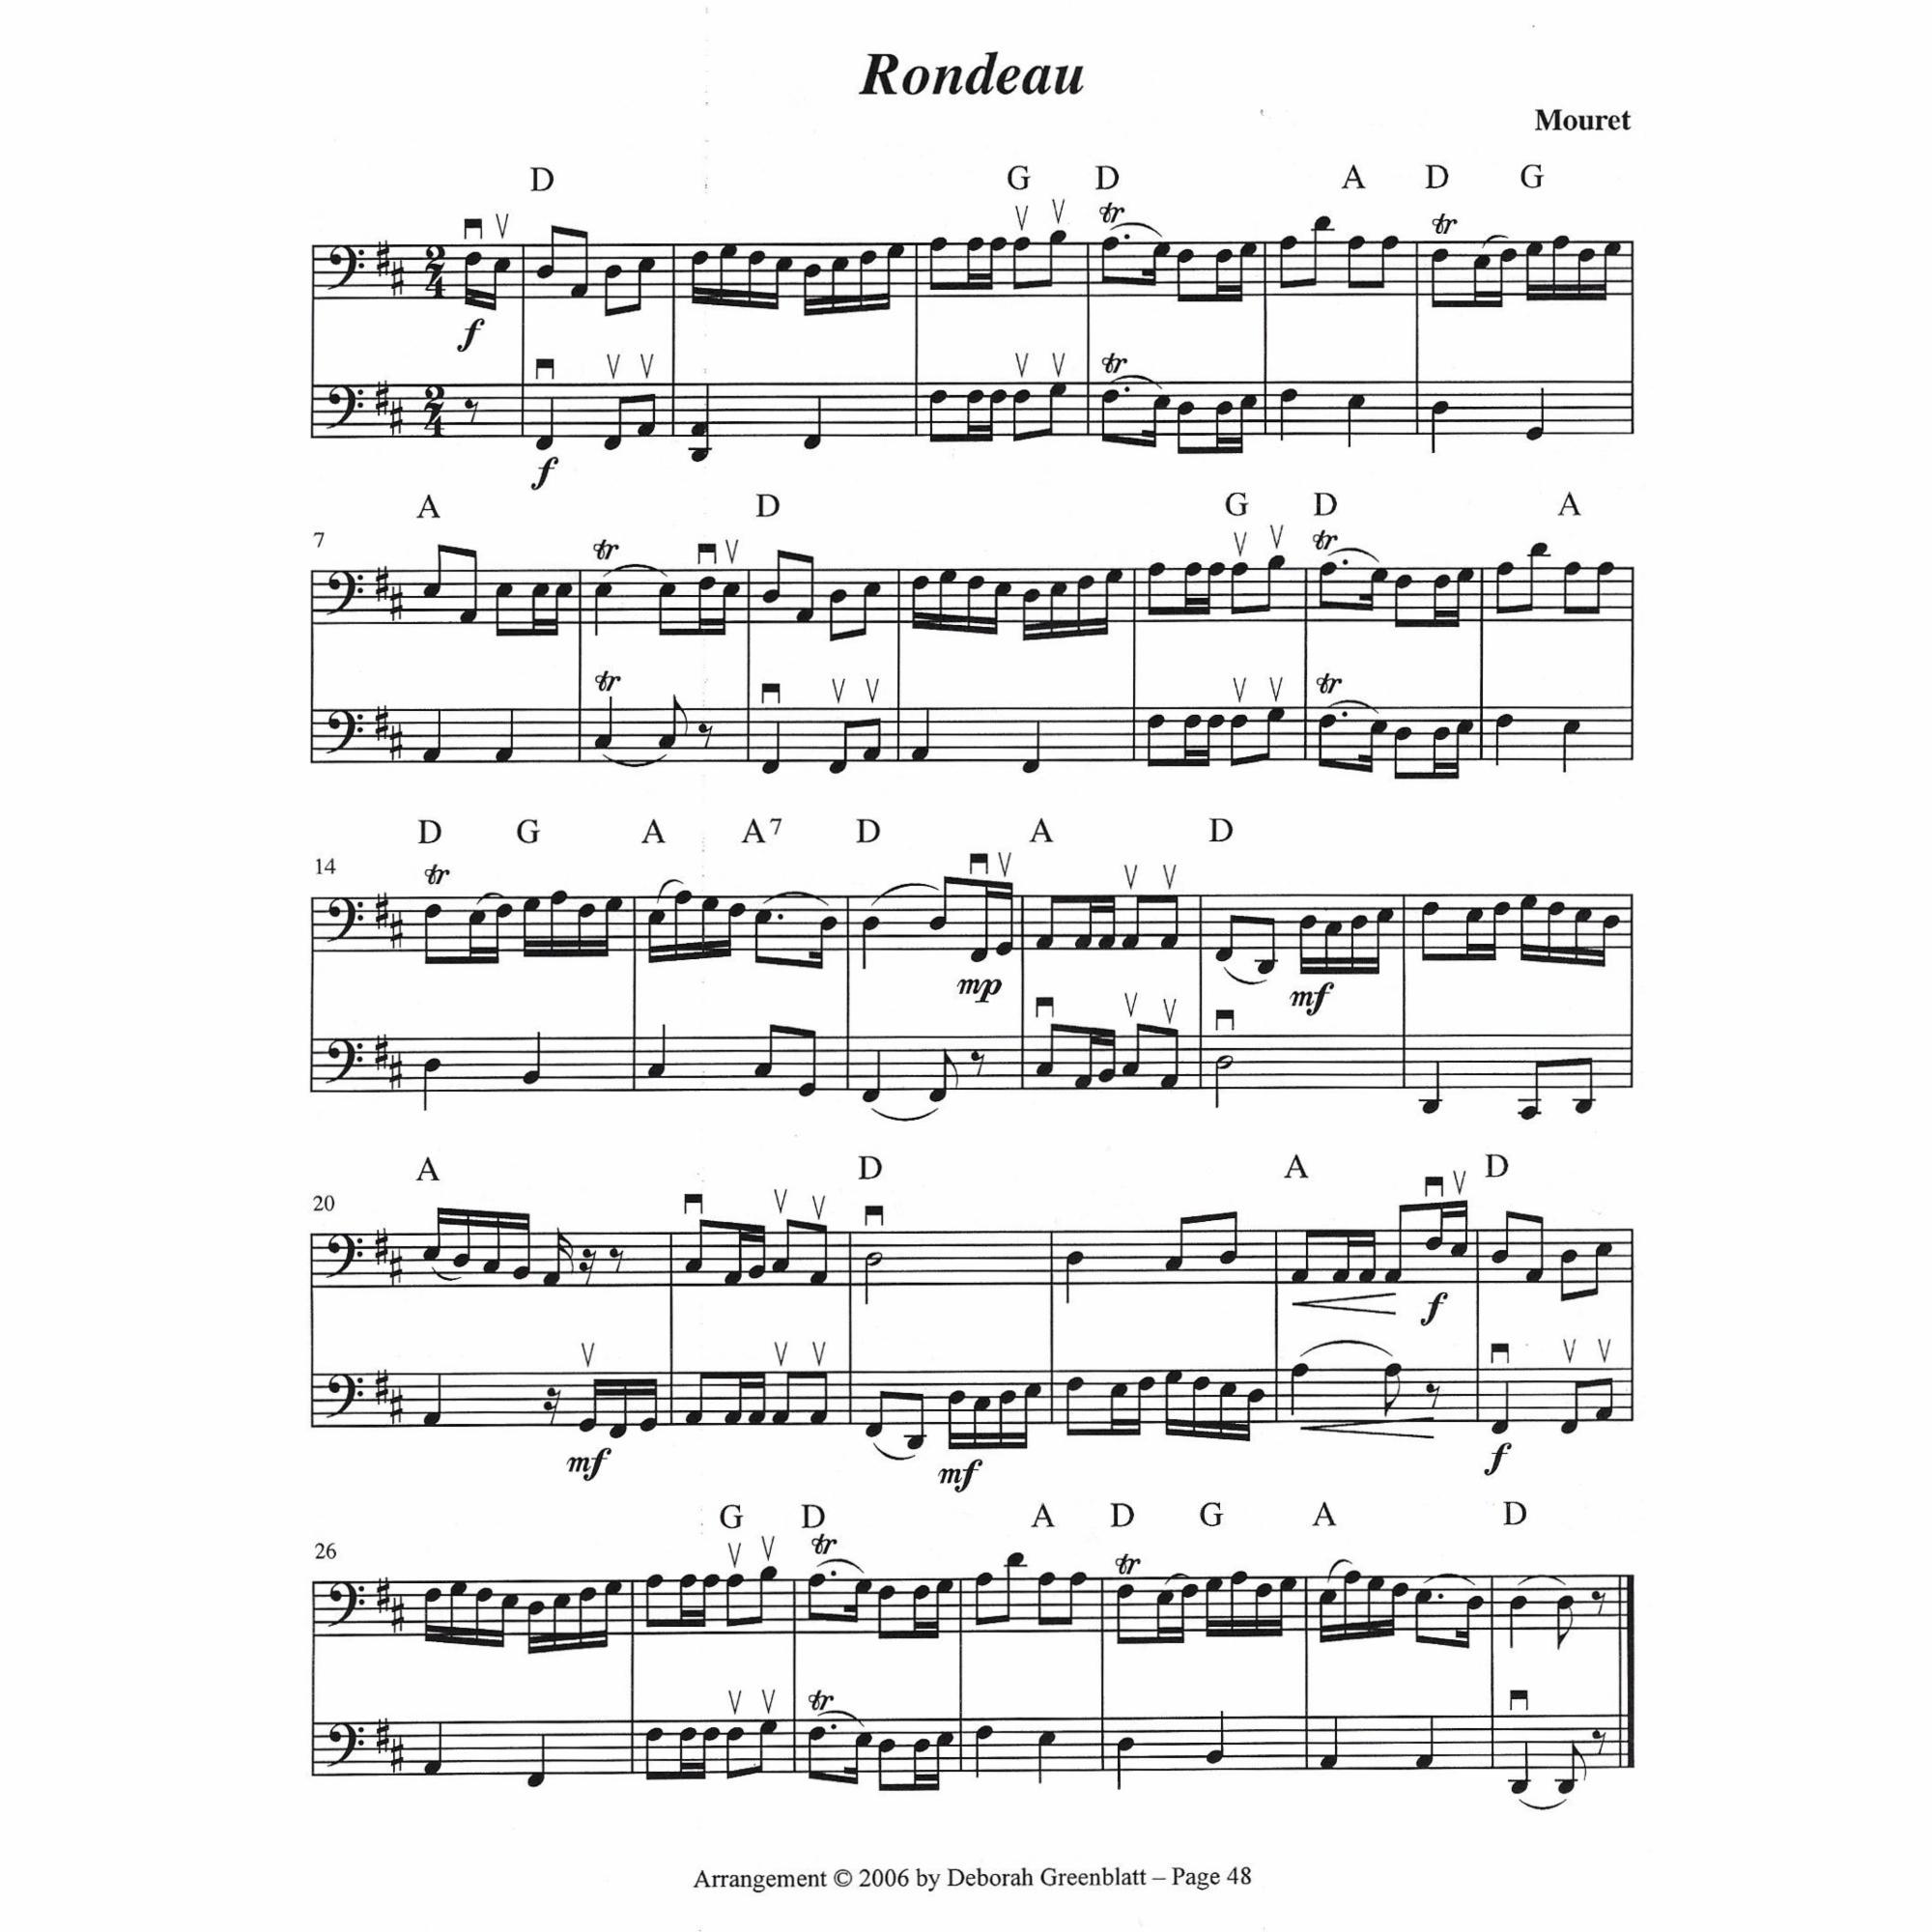 Sample: Two Cellos (Pg. 48)